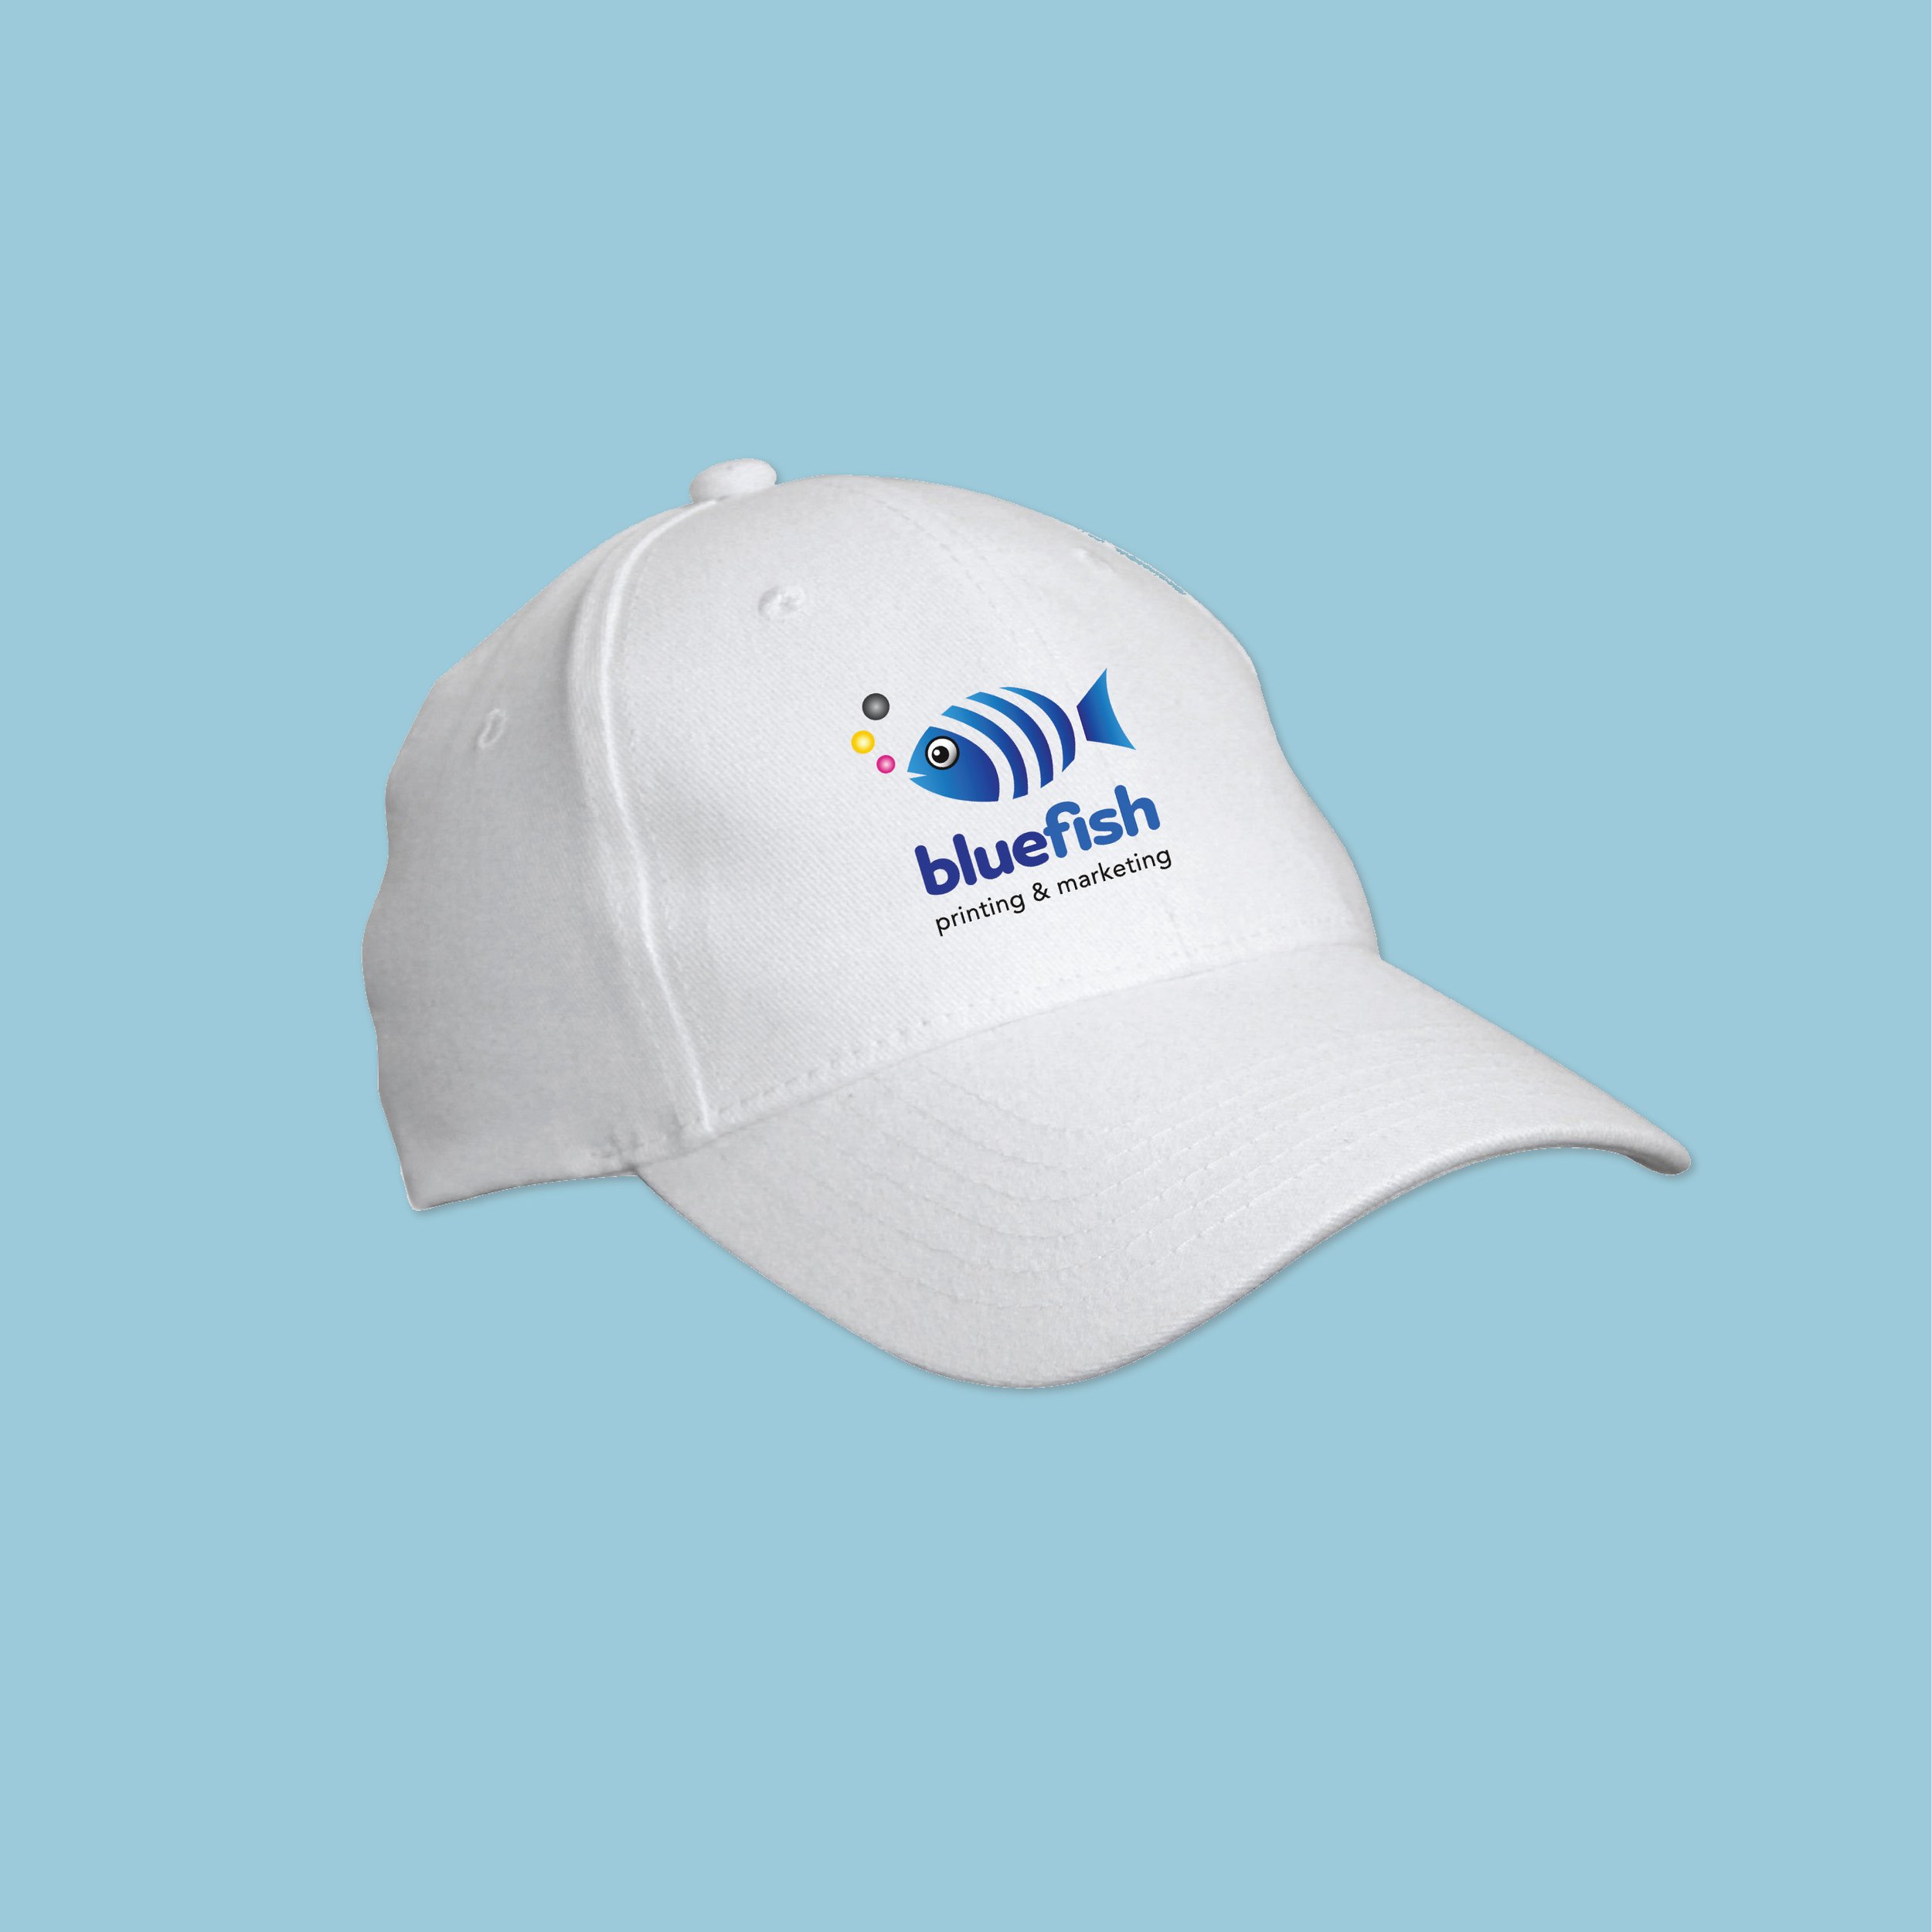 promo products-04.jpg